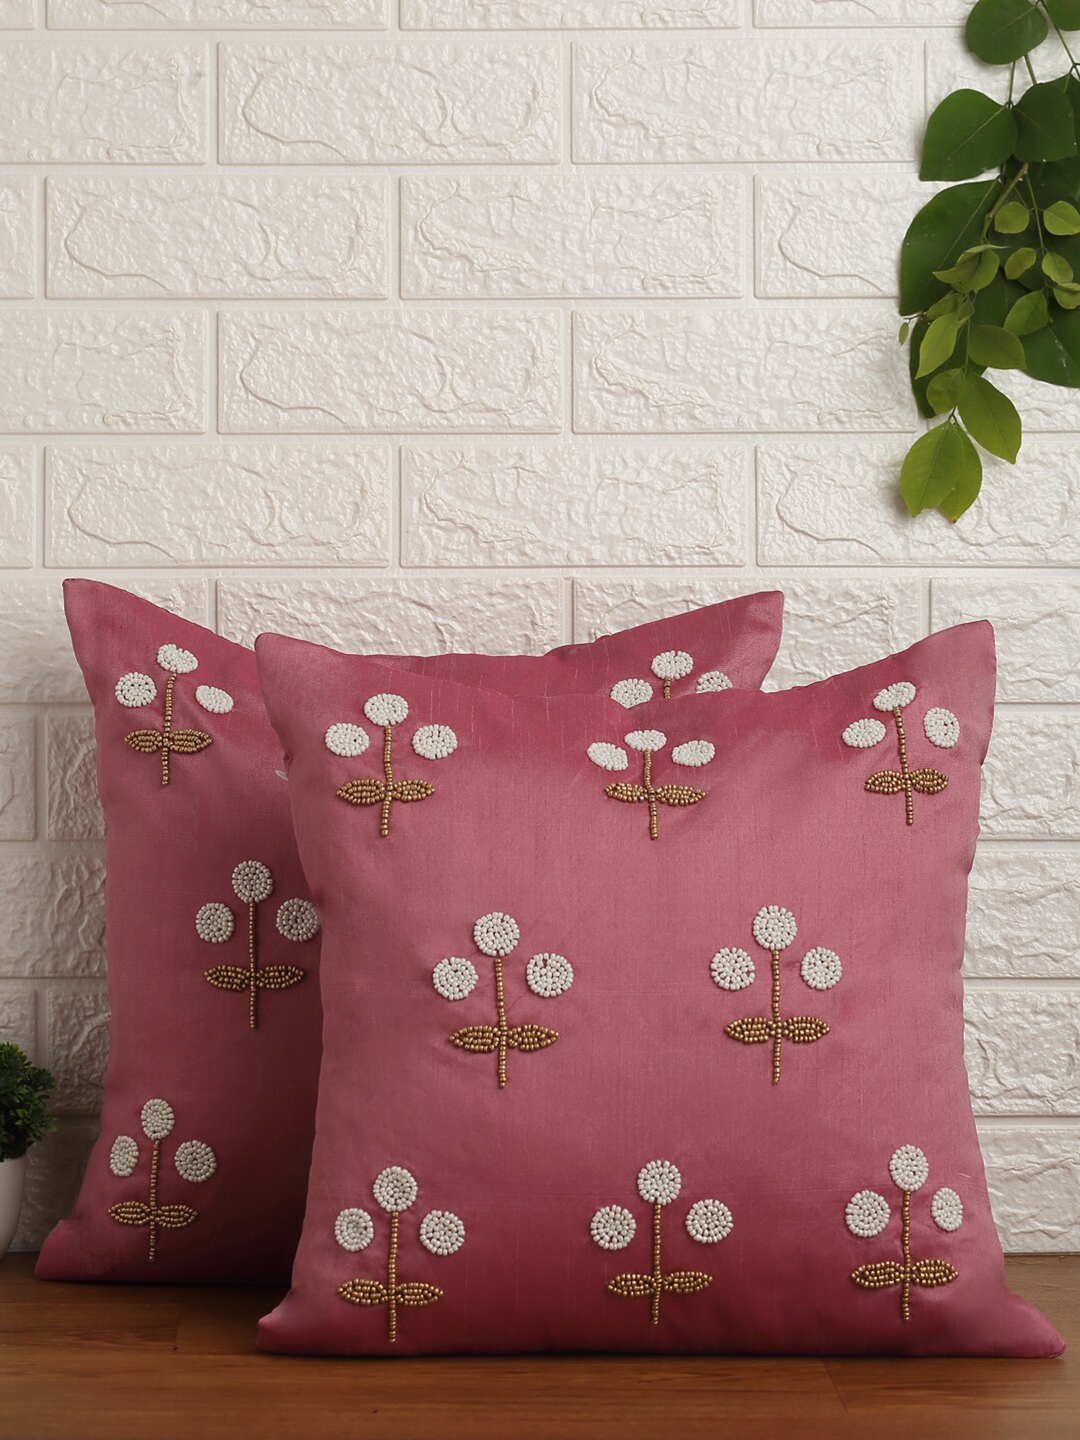 Alina decor Pink & White Set of 2 Embroidered Square Cushion Covers